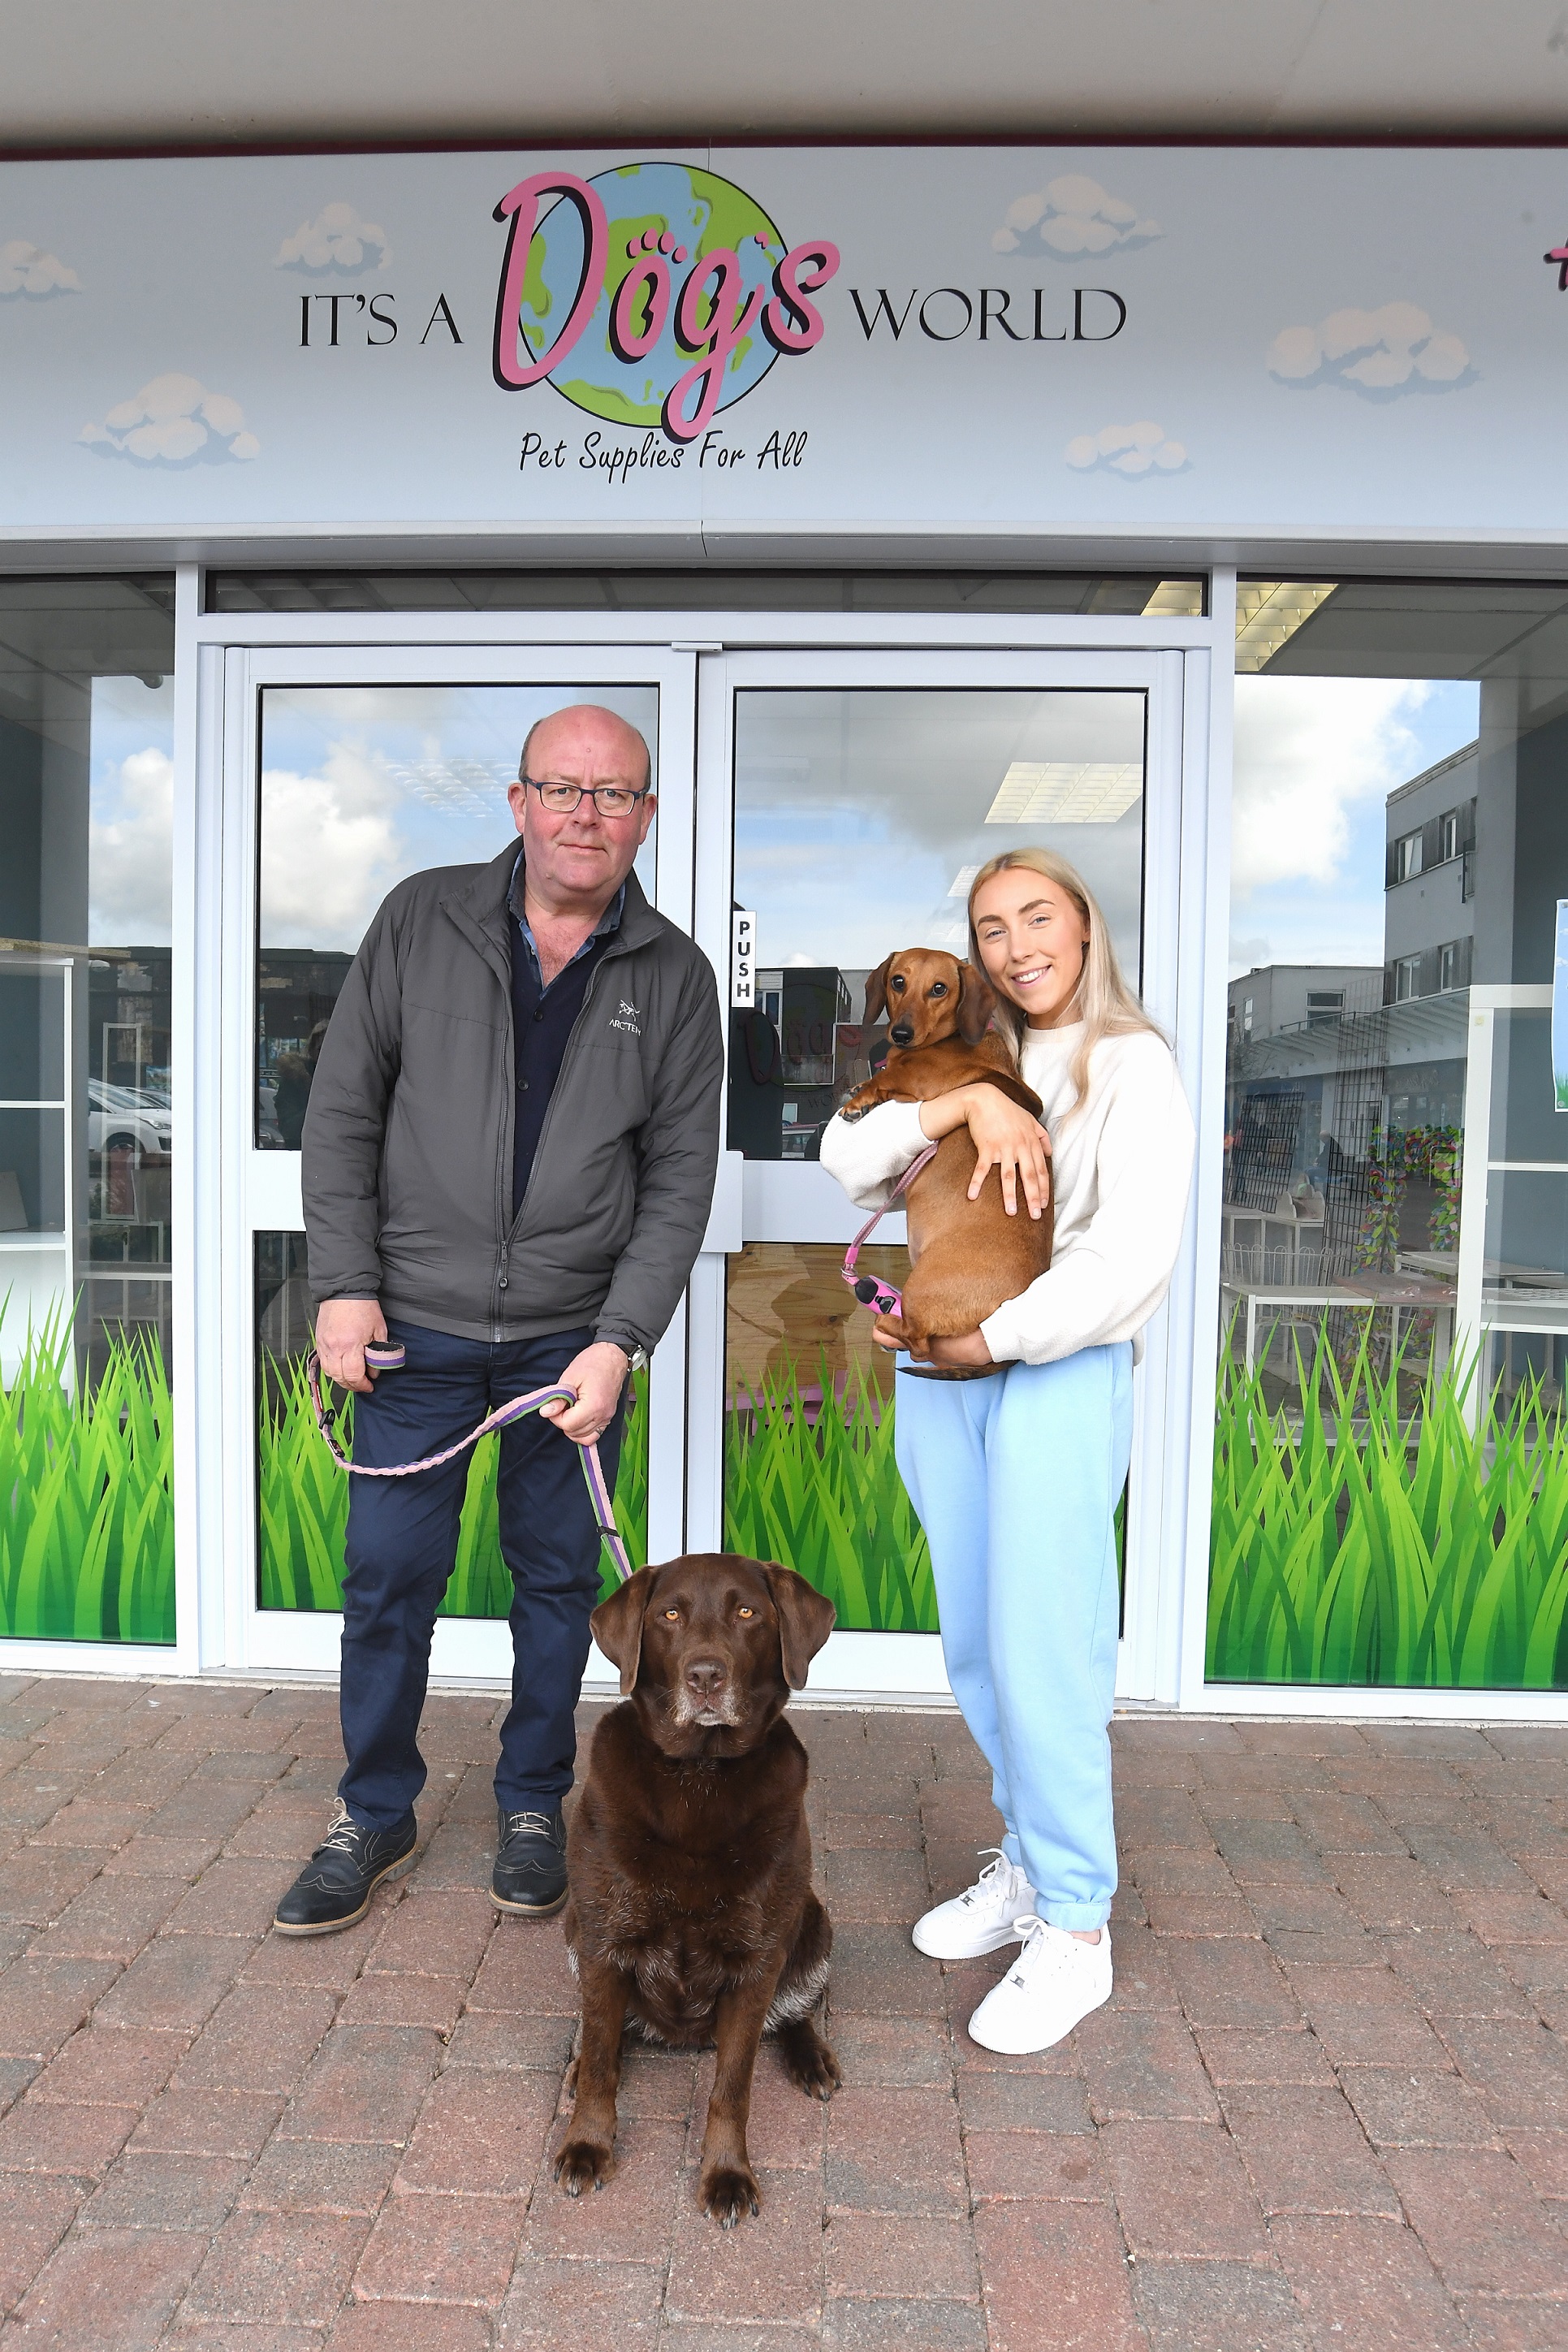 New pet supply shop opening in Kenilworth to set tails wagging